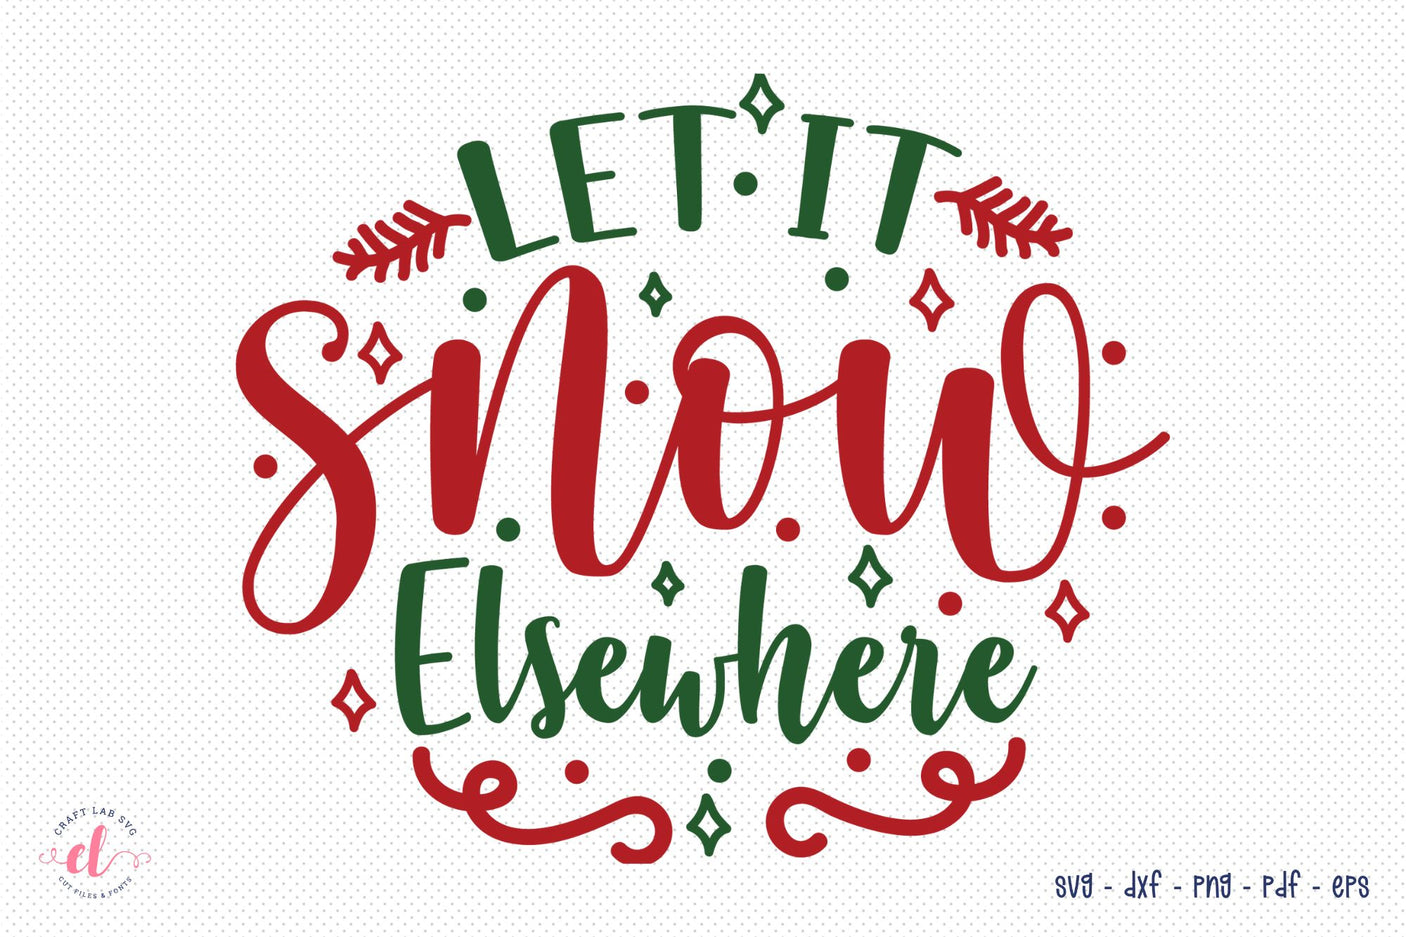 Let It Snow Elsewhere, Free Christmas SVG